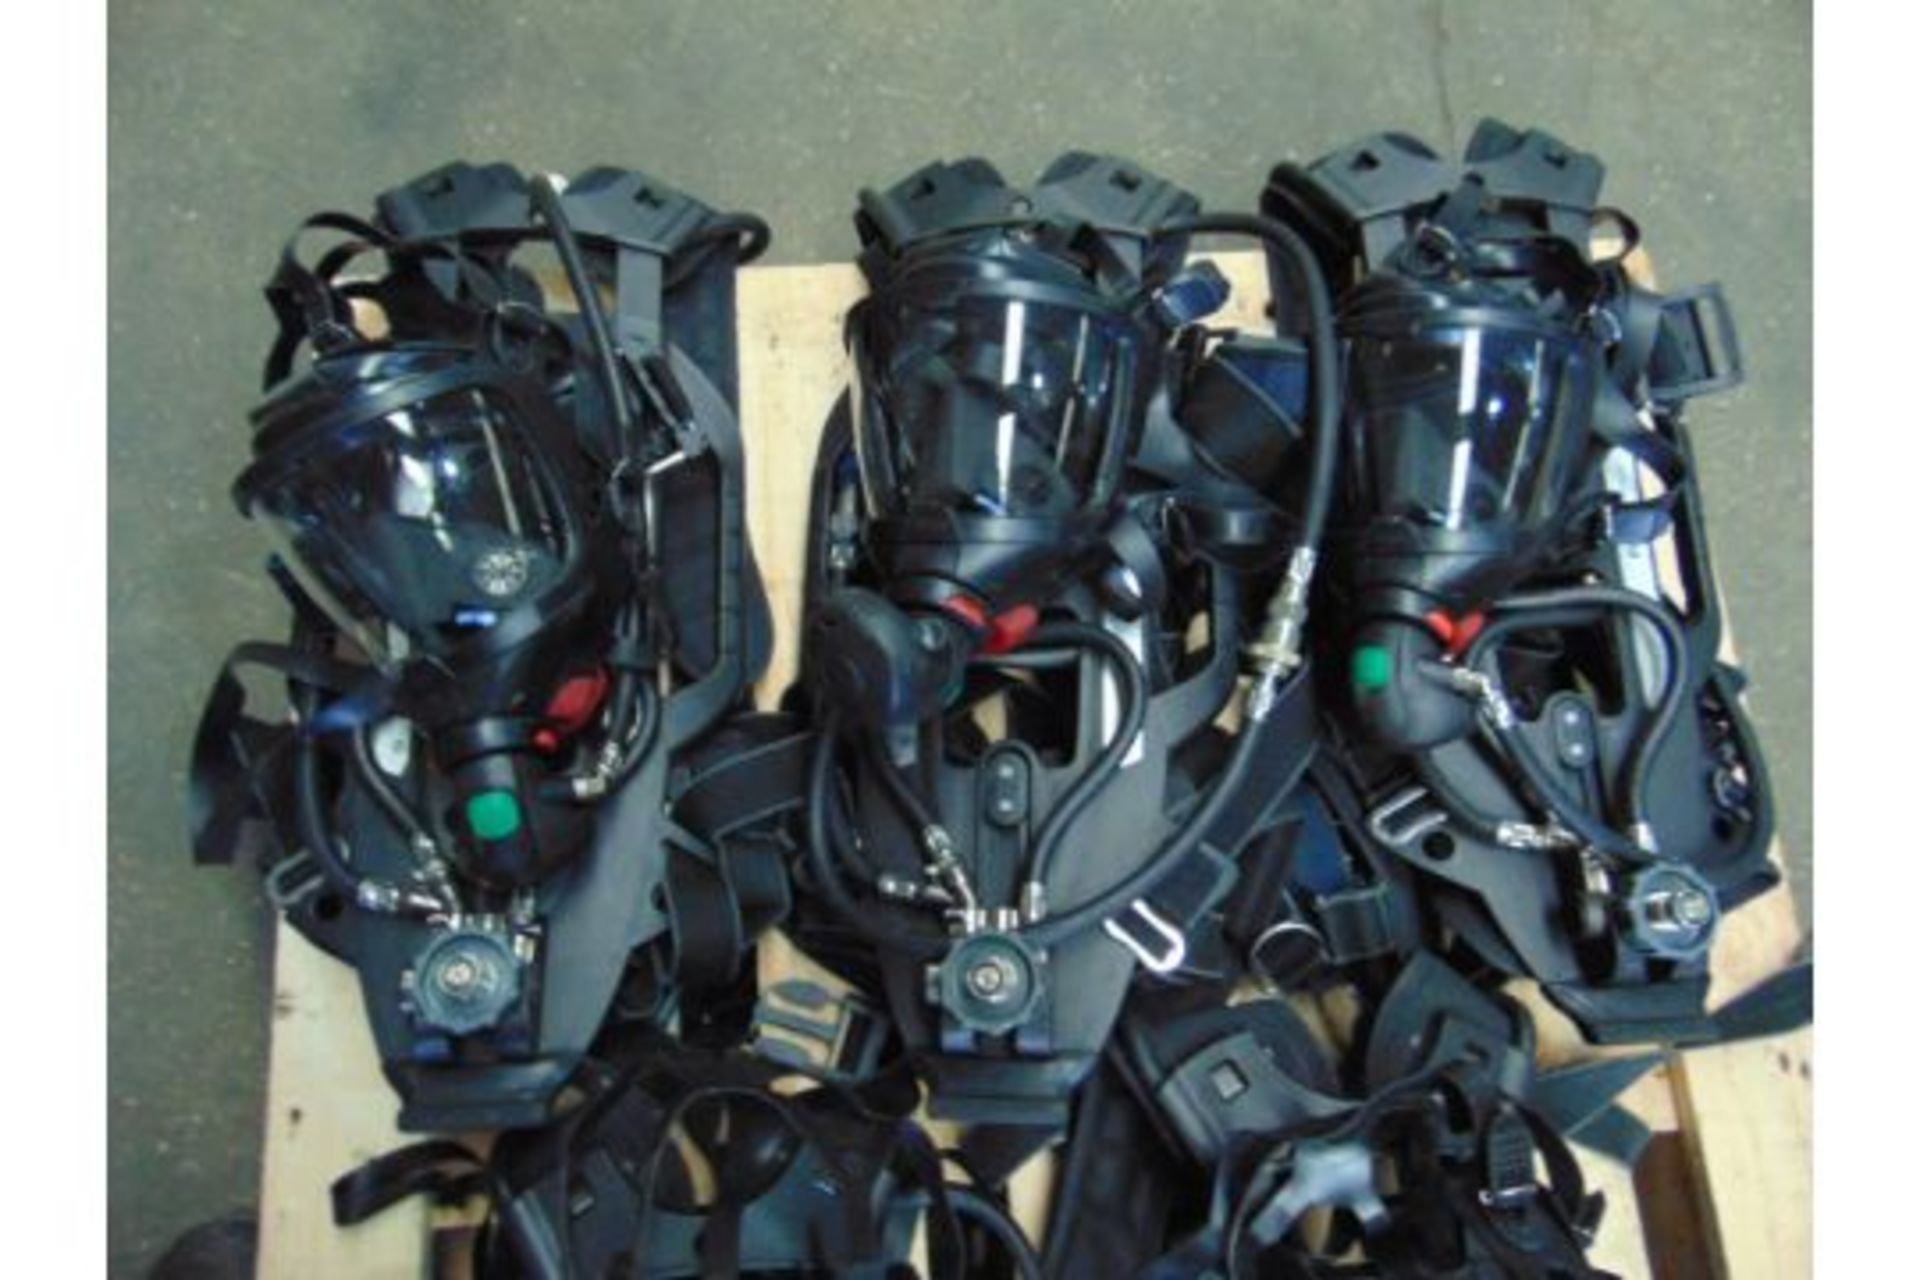 5 x Drager PSS 7000 Self Contained Breathing Apparatus w/ 10 x Drager 300 Bar Air Cylinders - Image 8 of 28